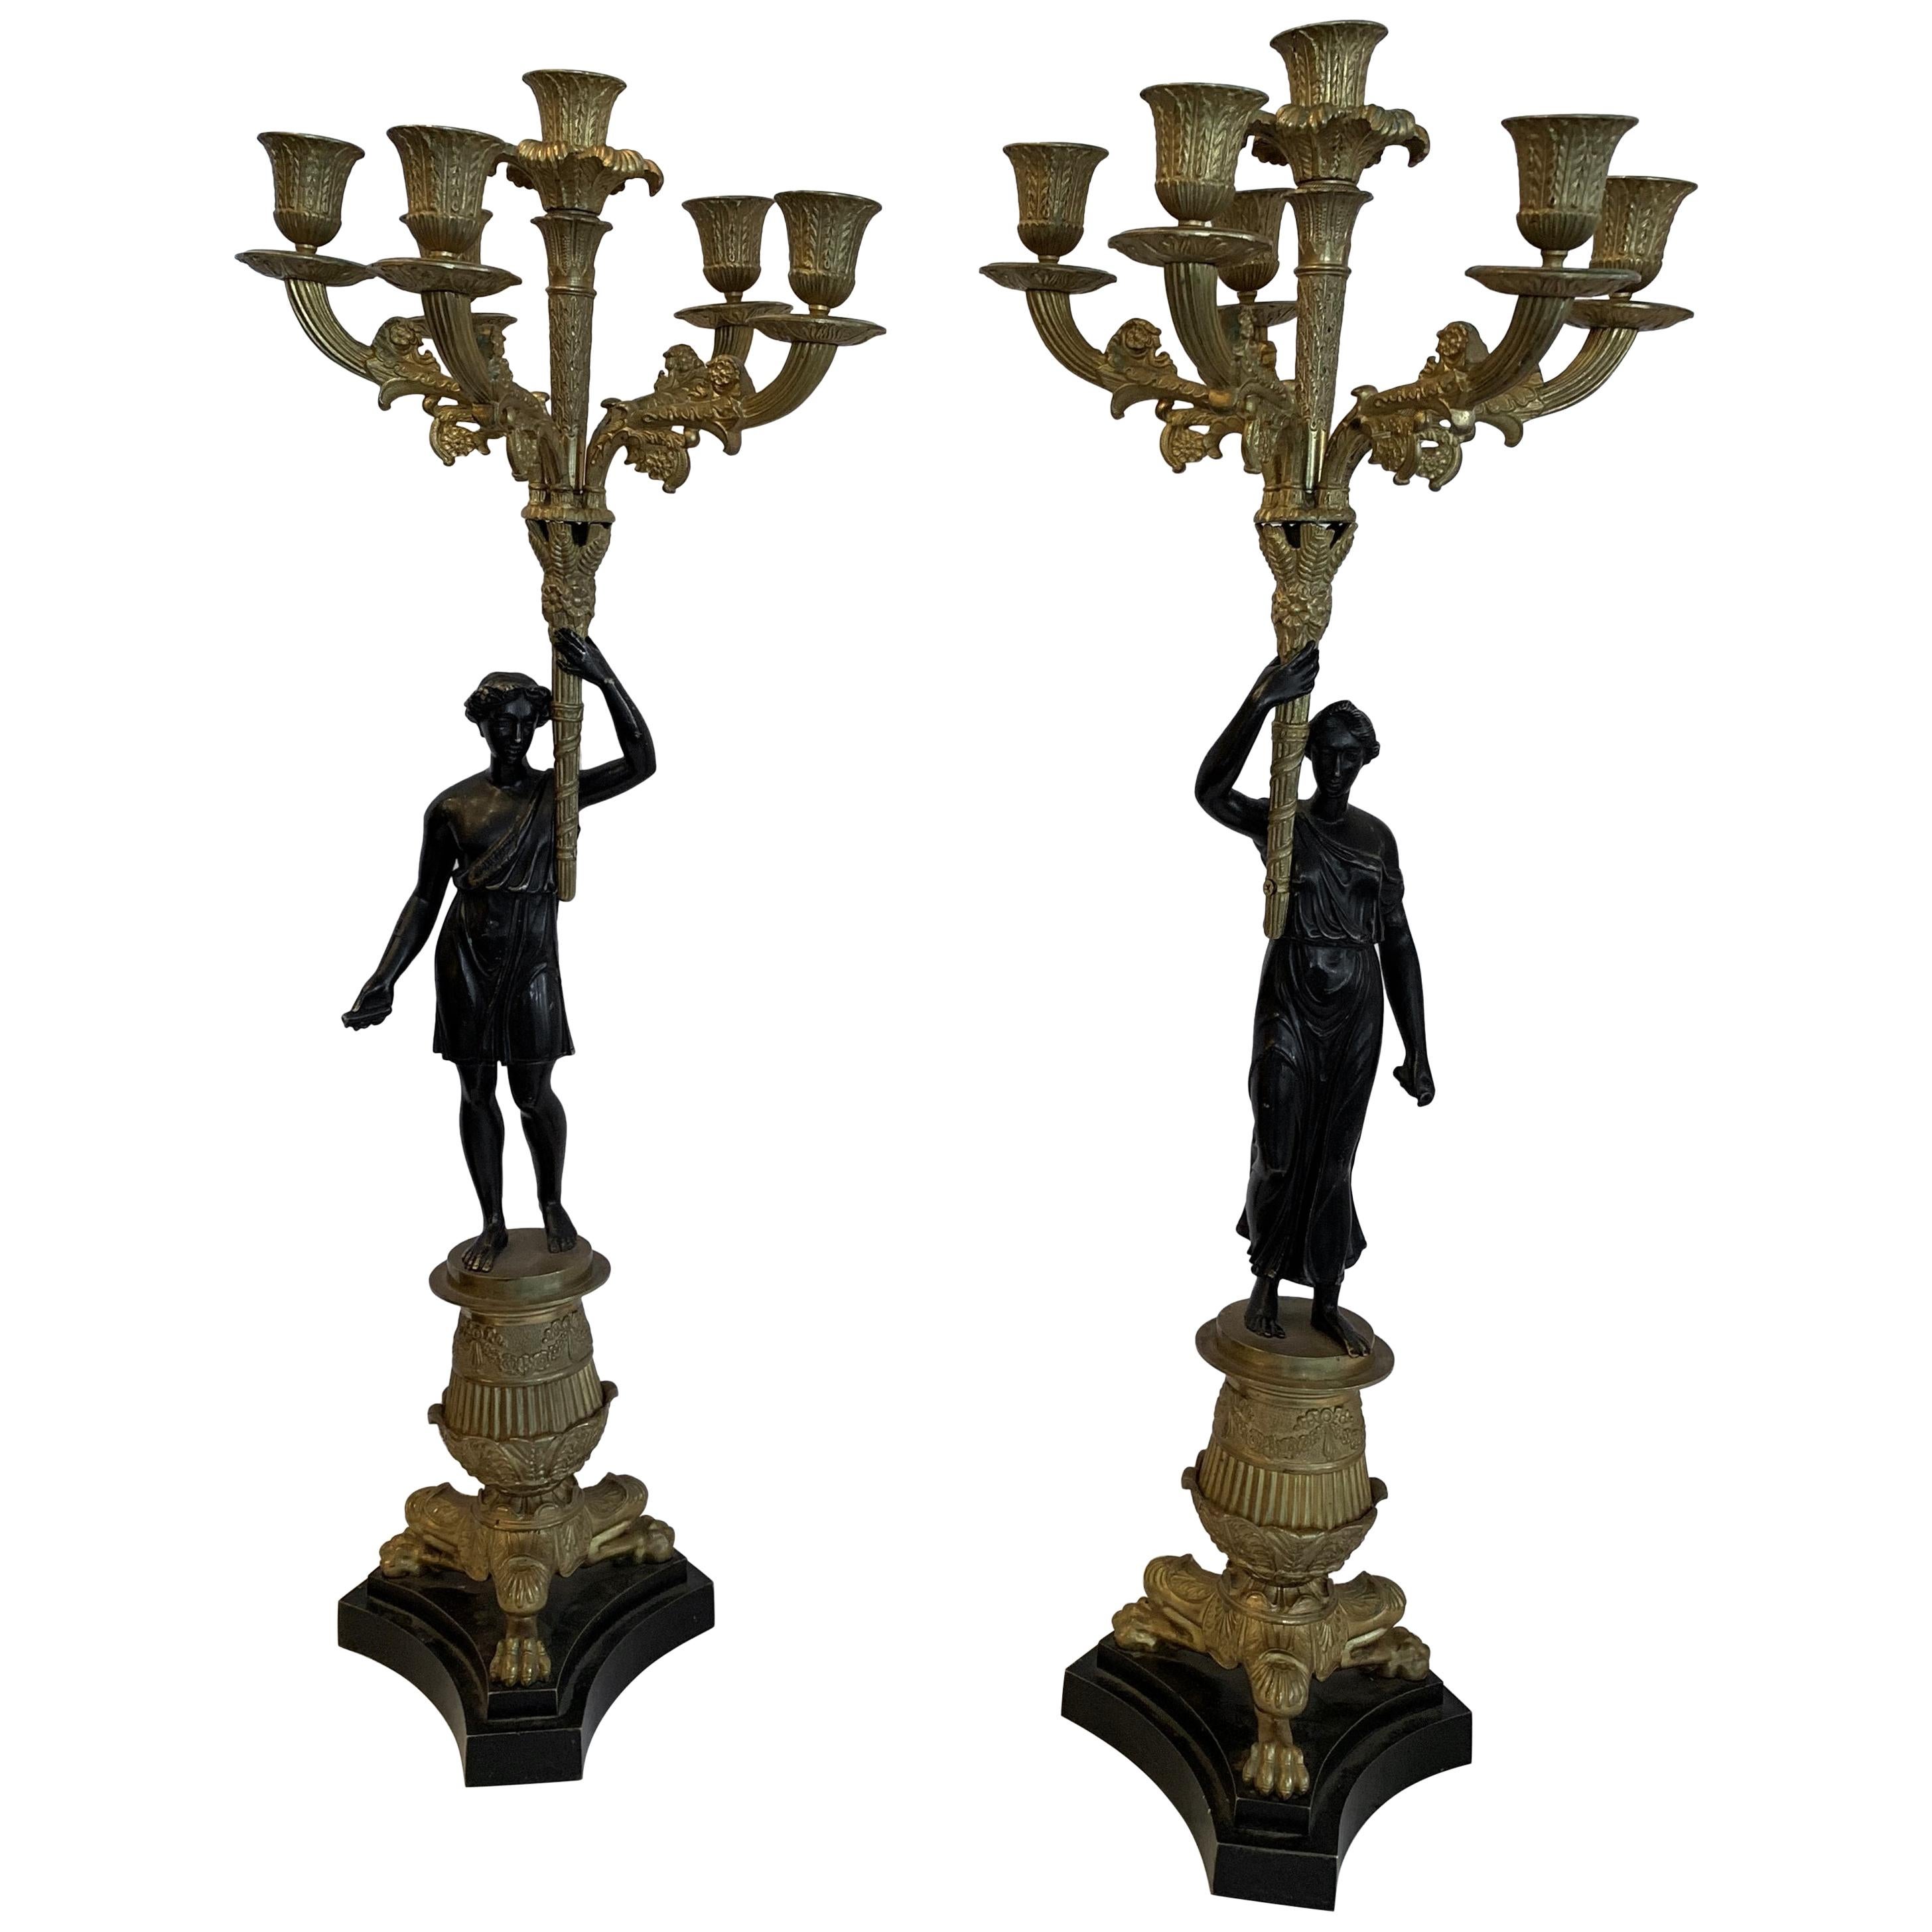 Wonderful Pair of French Empire Gilt Patinated Bronze Figural Regency For Sale